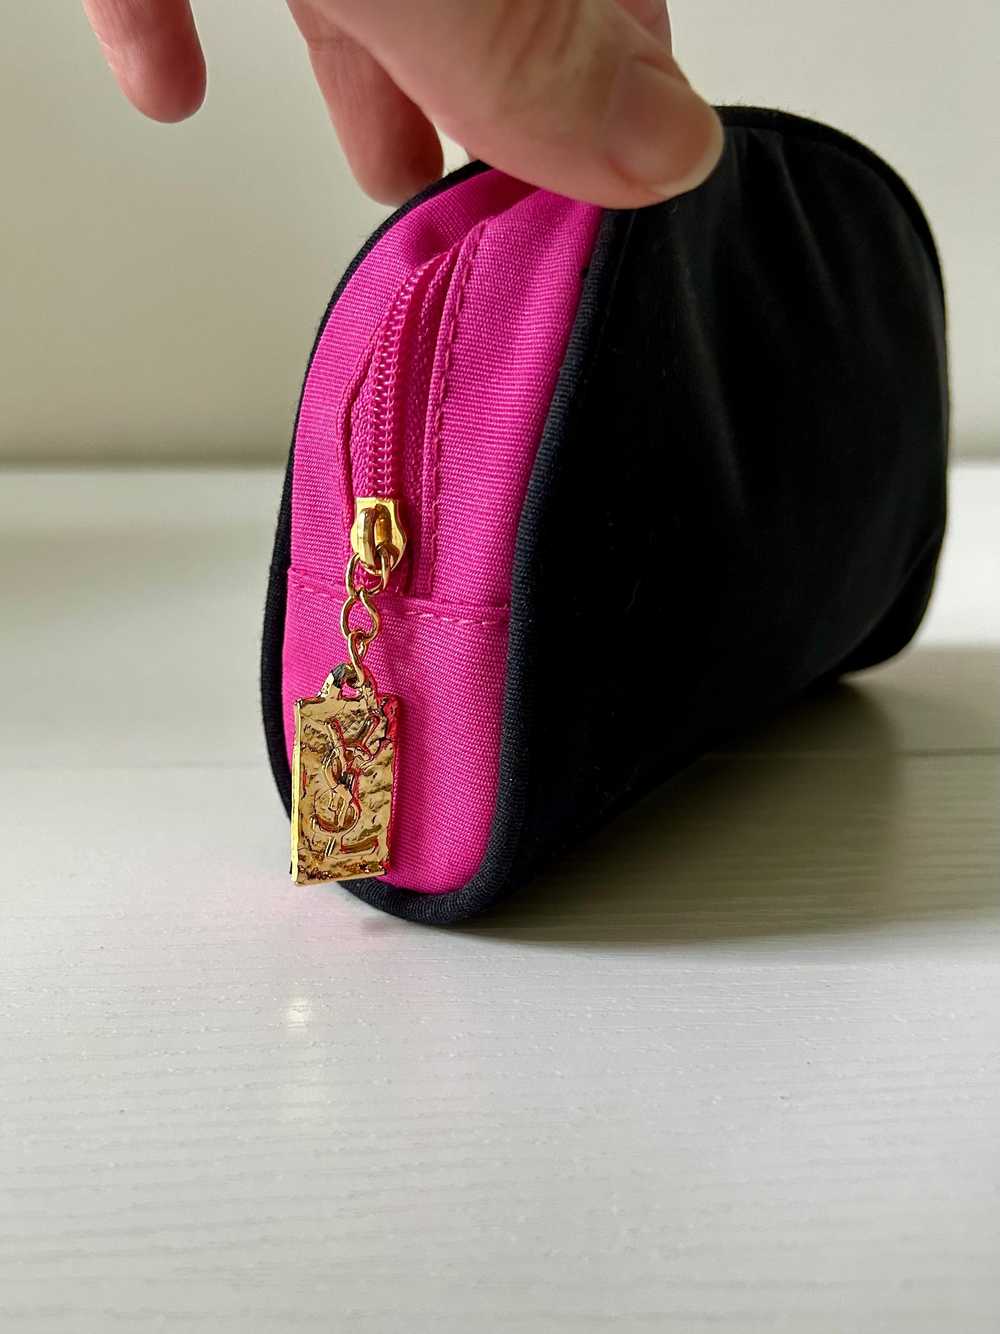 Vintage YSL Black and Hot Pink Makeup Pouch - image 3